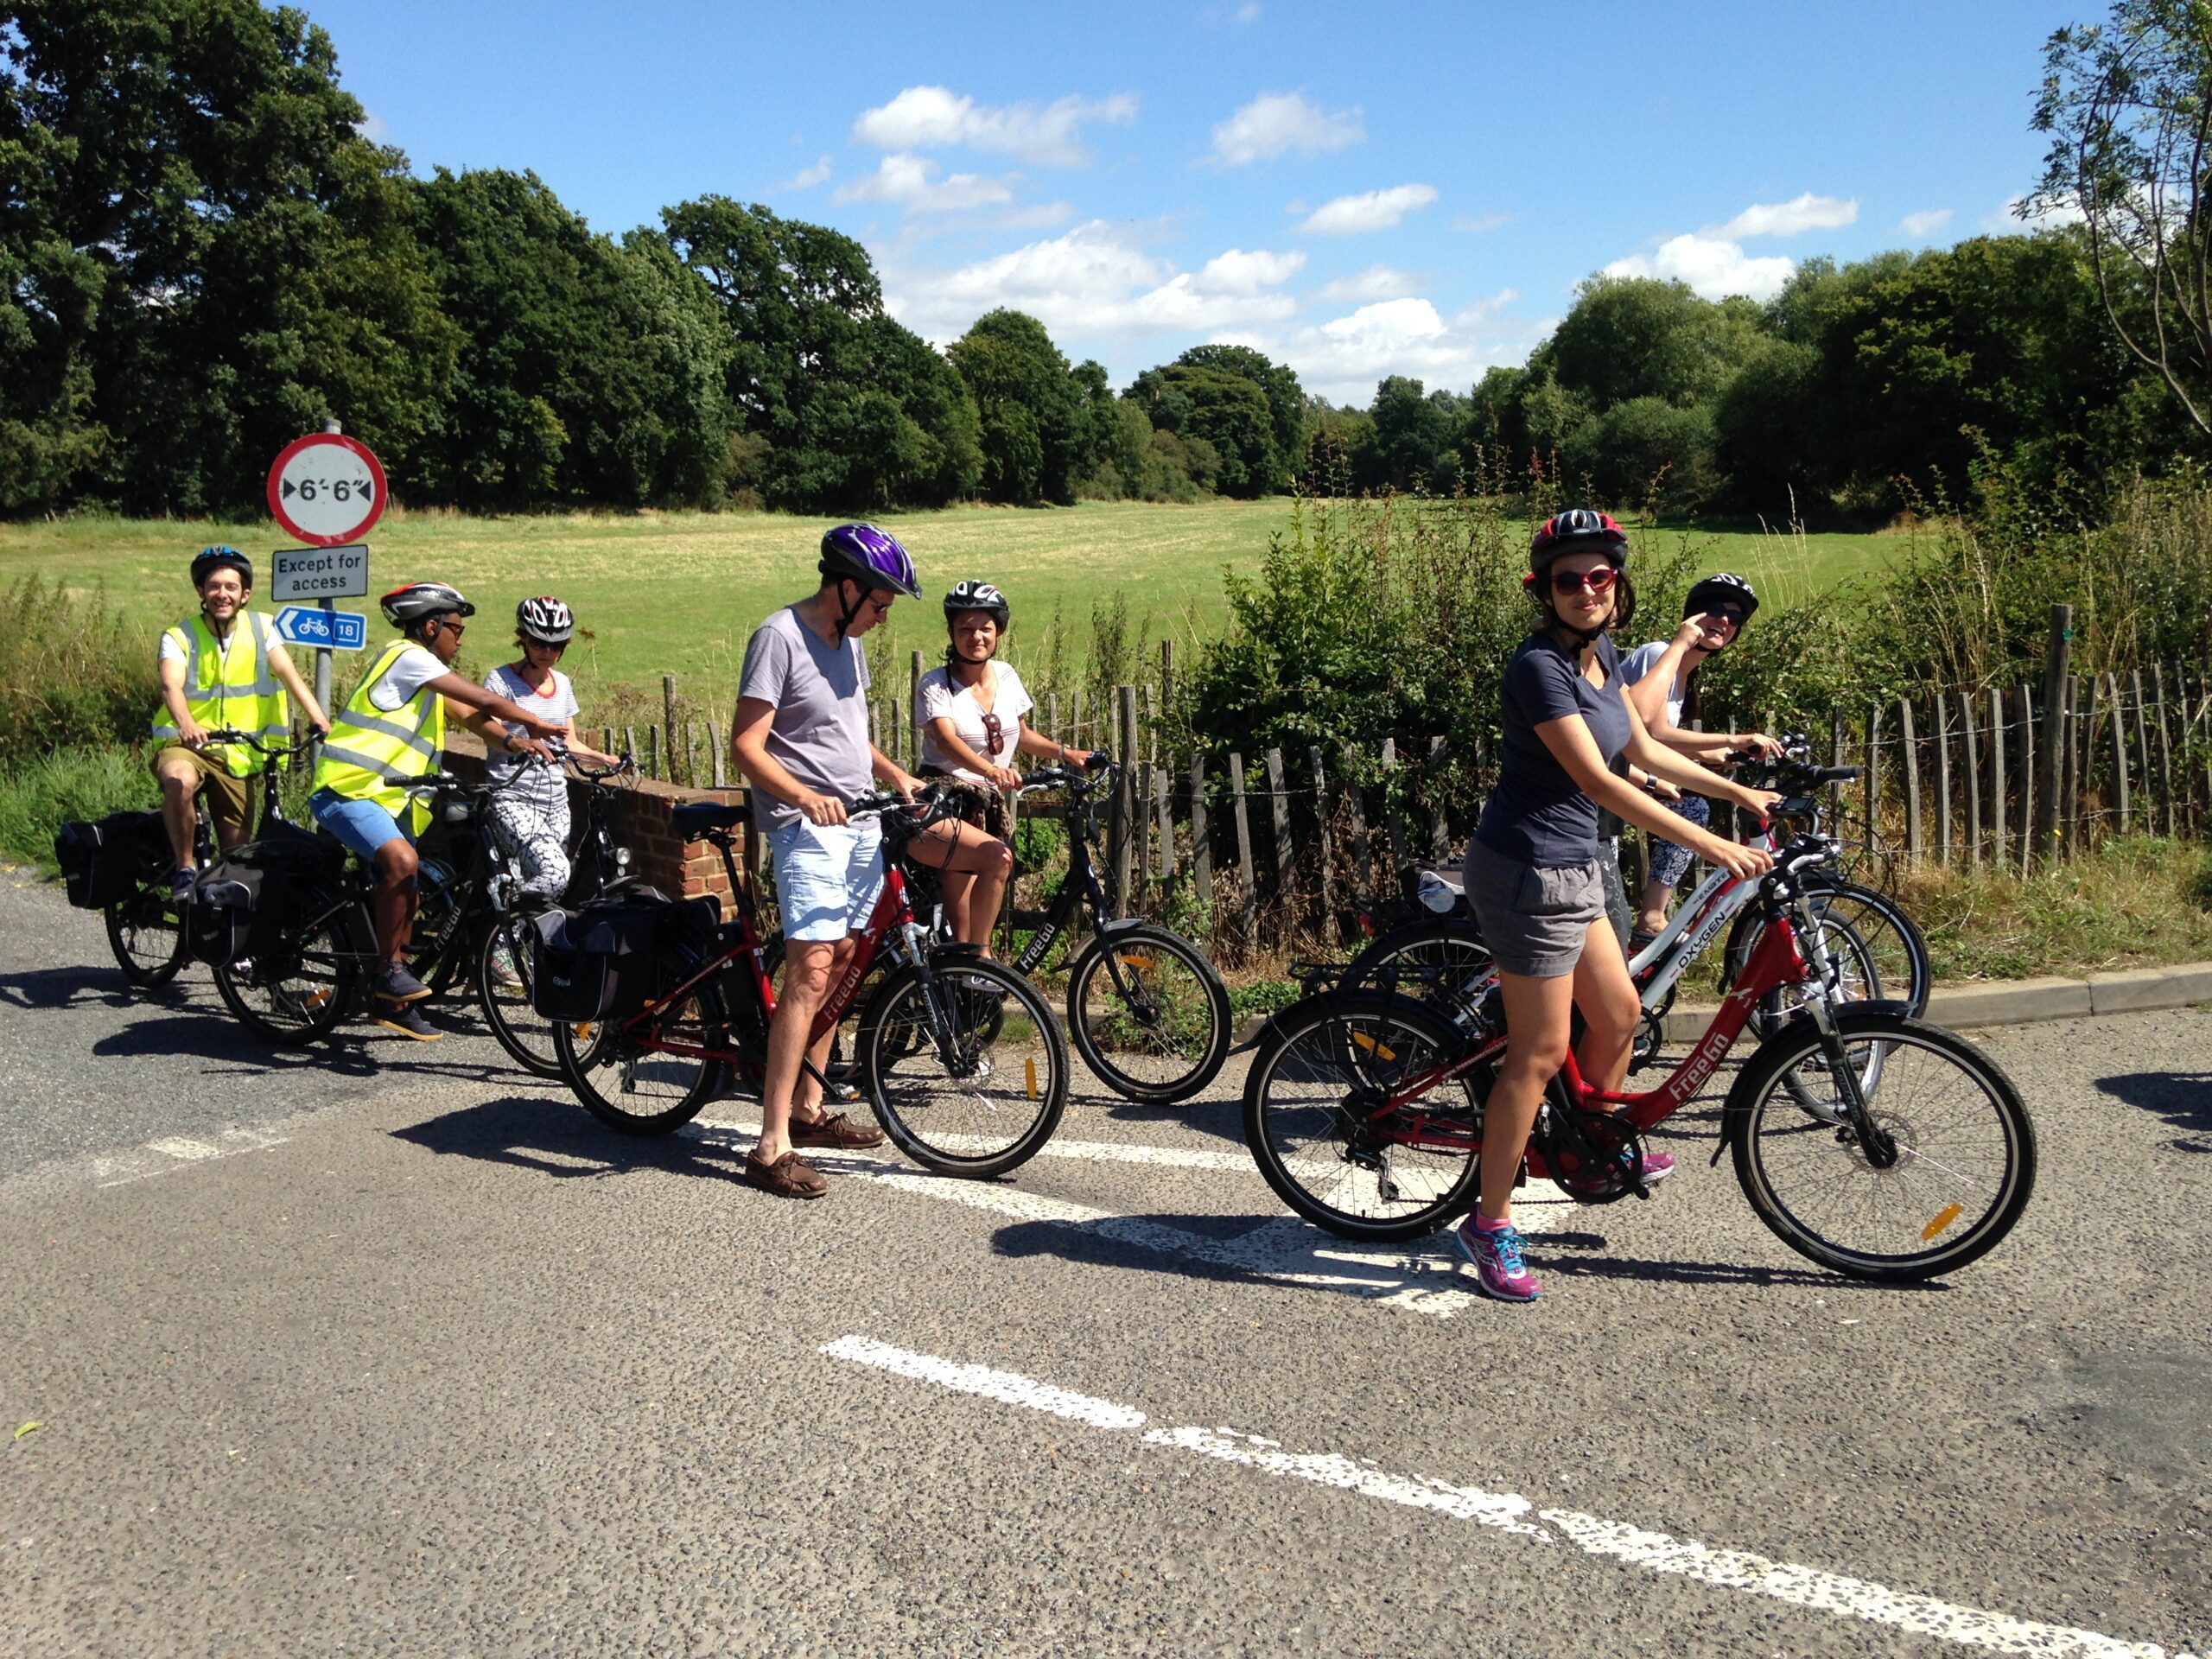 Group of people on bikes, stopped on a road, with grass fields and trees in background.